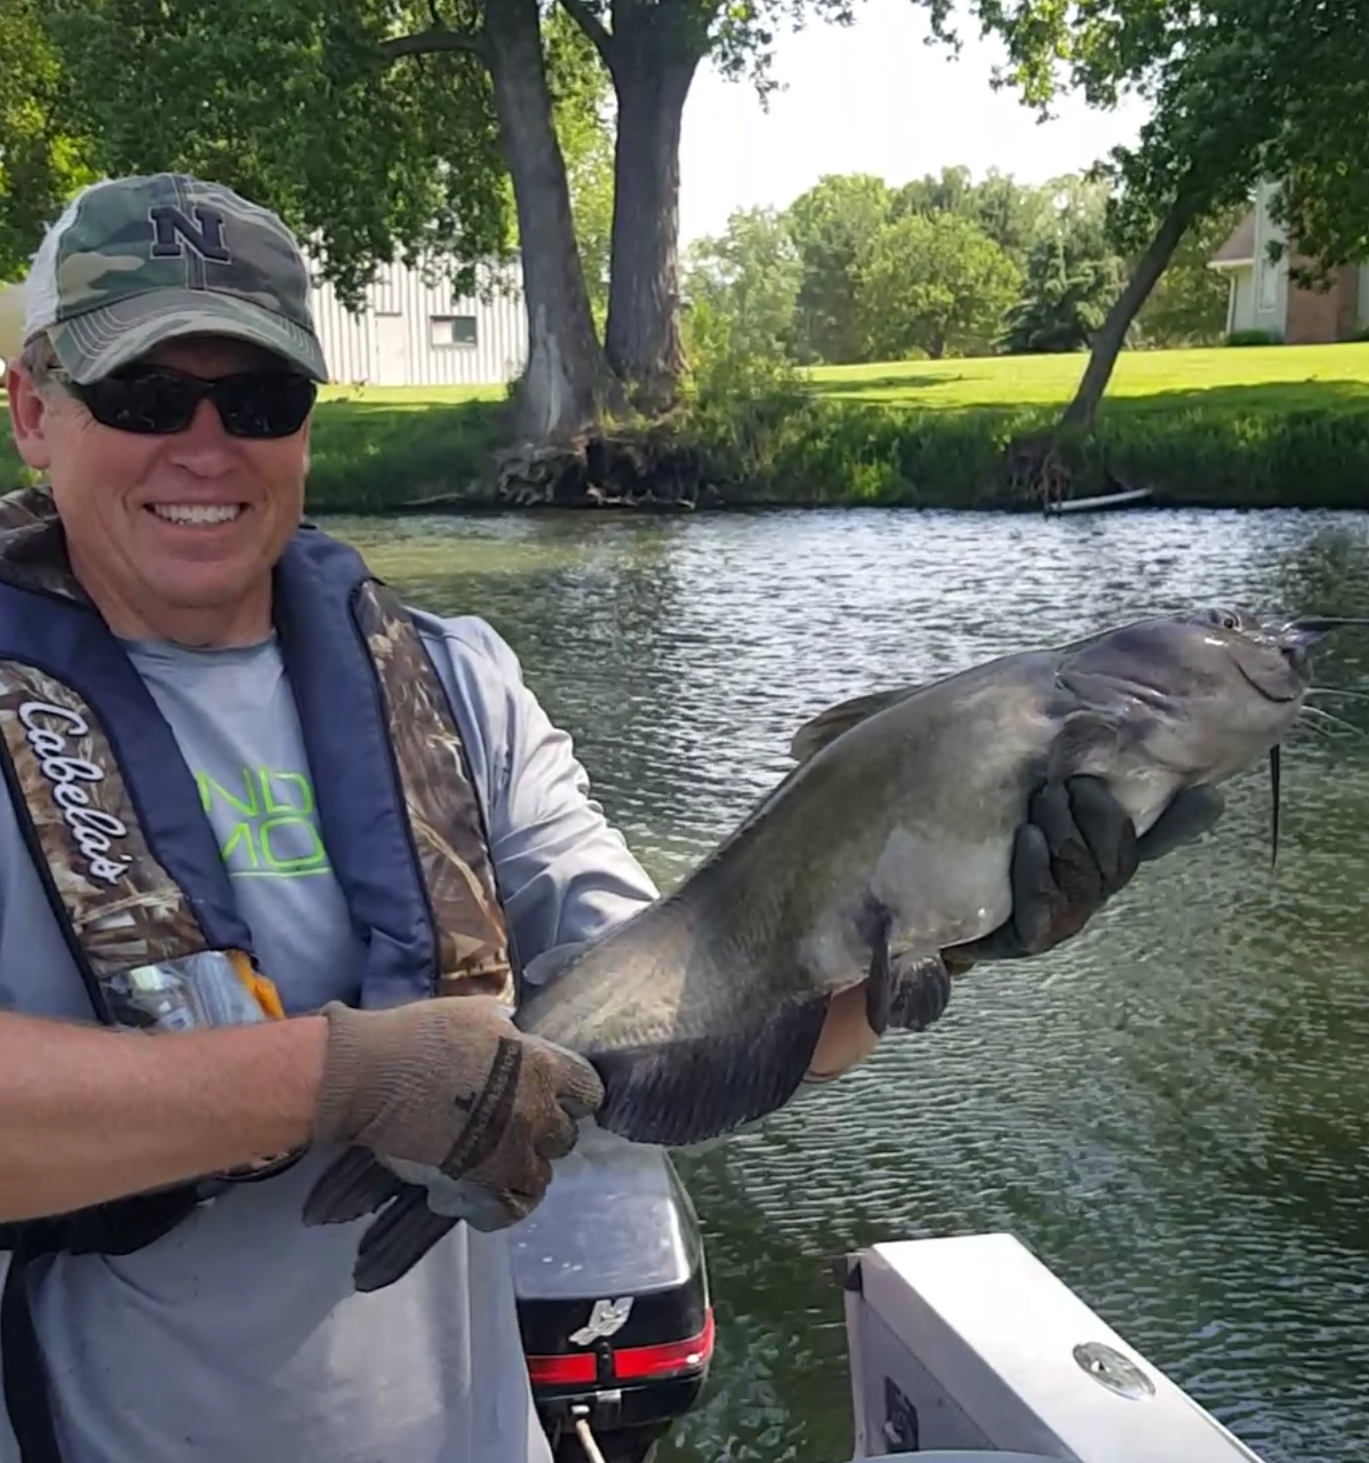 Nebraska Conservation Officer Rich Berggren of Waterloo wearing rubber fish handling gloves holding a nice-sized channel catfish he landed, then released. Photo by Greg Wagner.